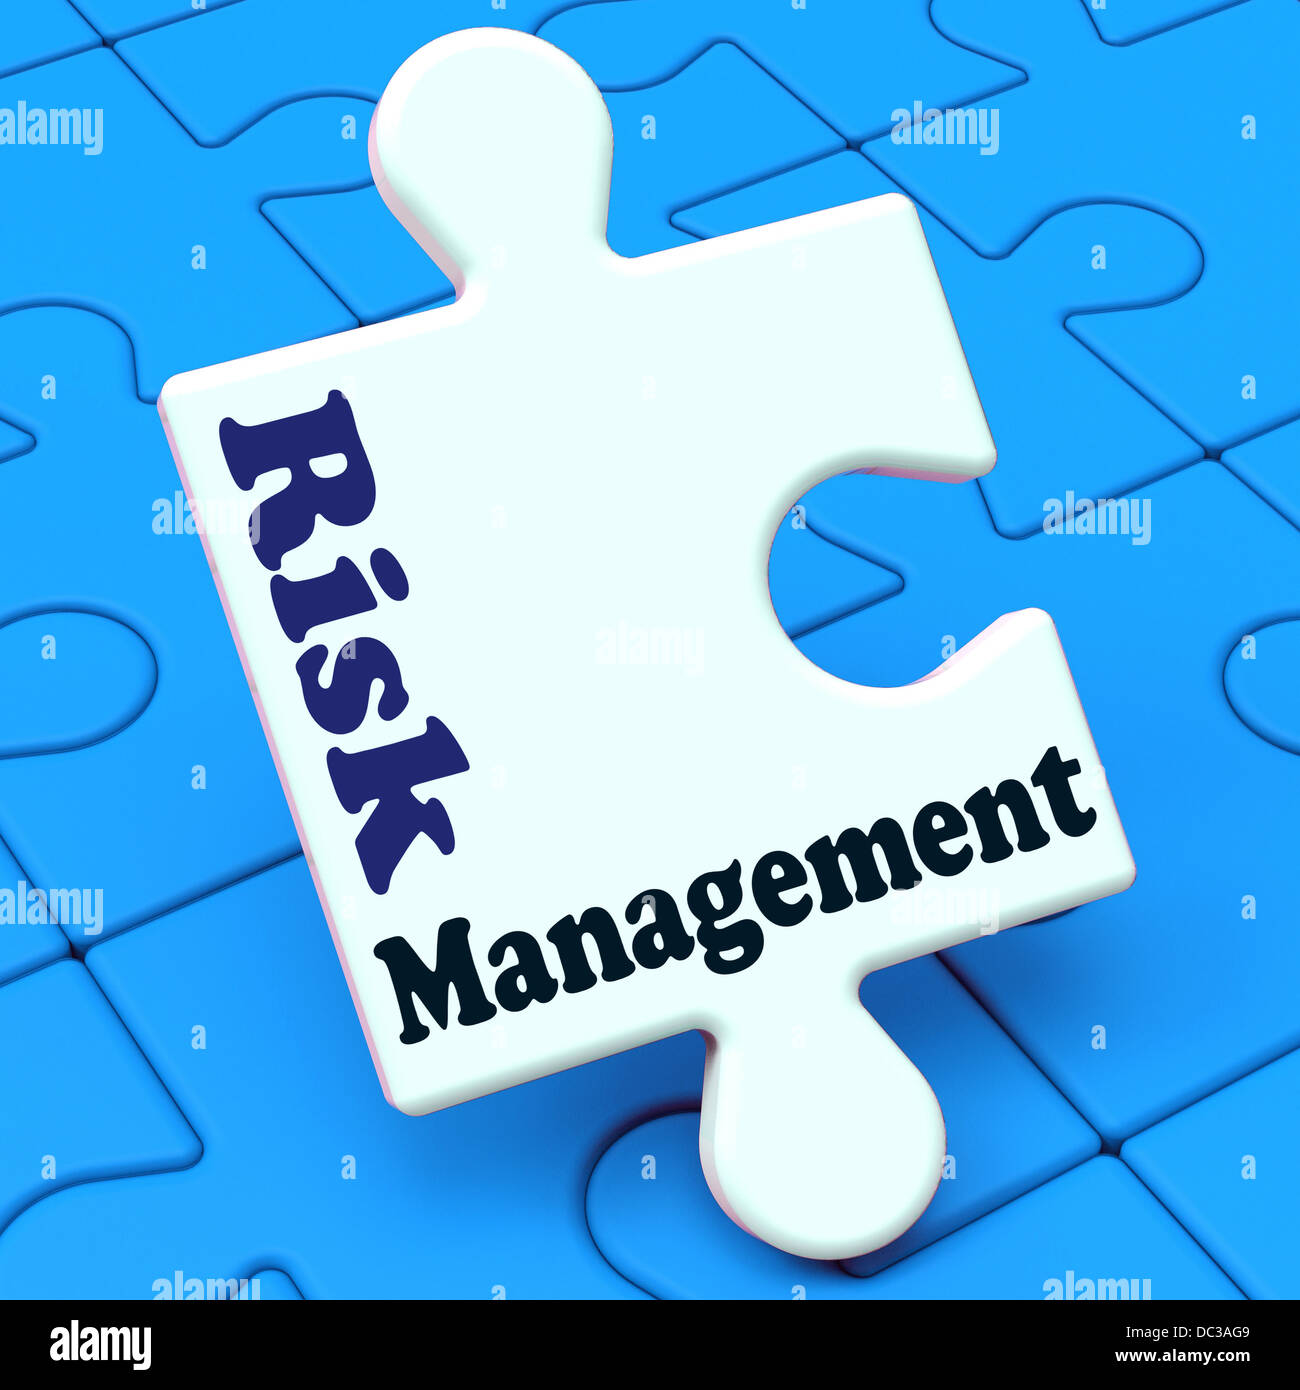 Risk Management Means Analyze Evaluate Avoid Crisis Stock Photo